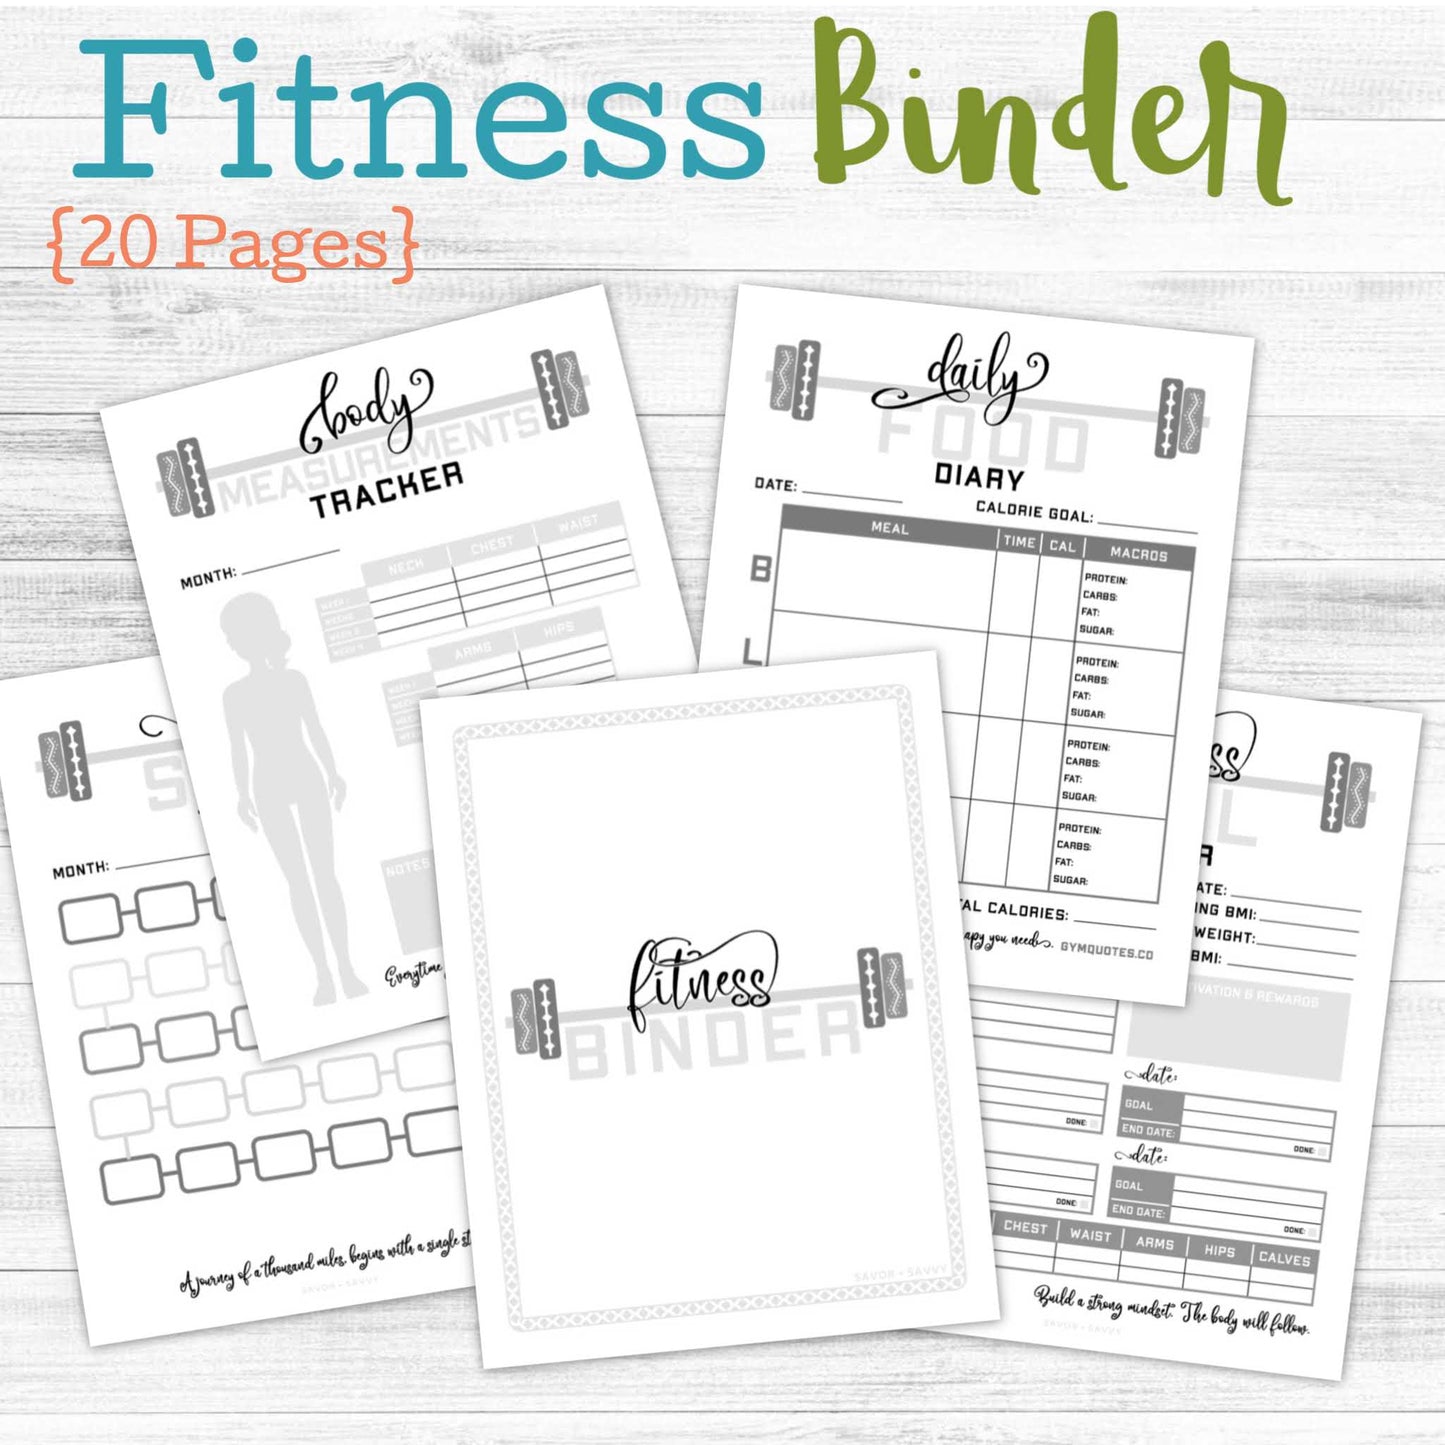 20-Page Fitness Binder 💪